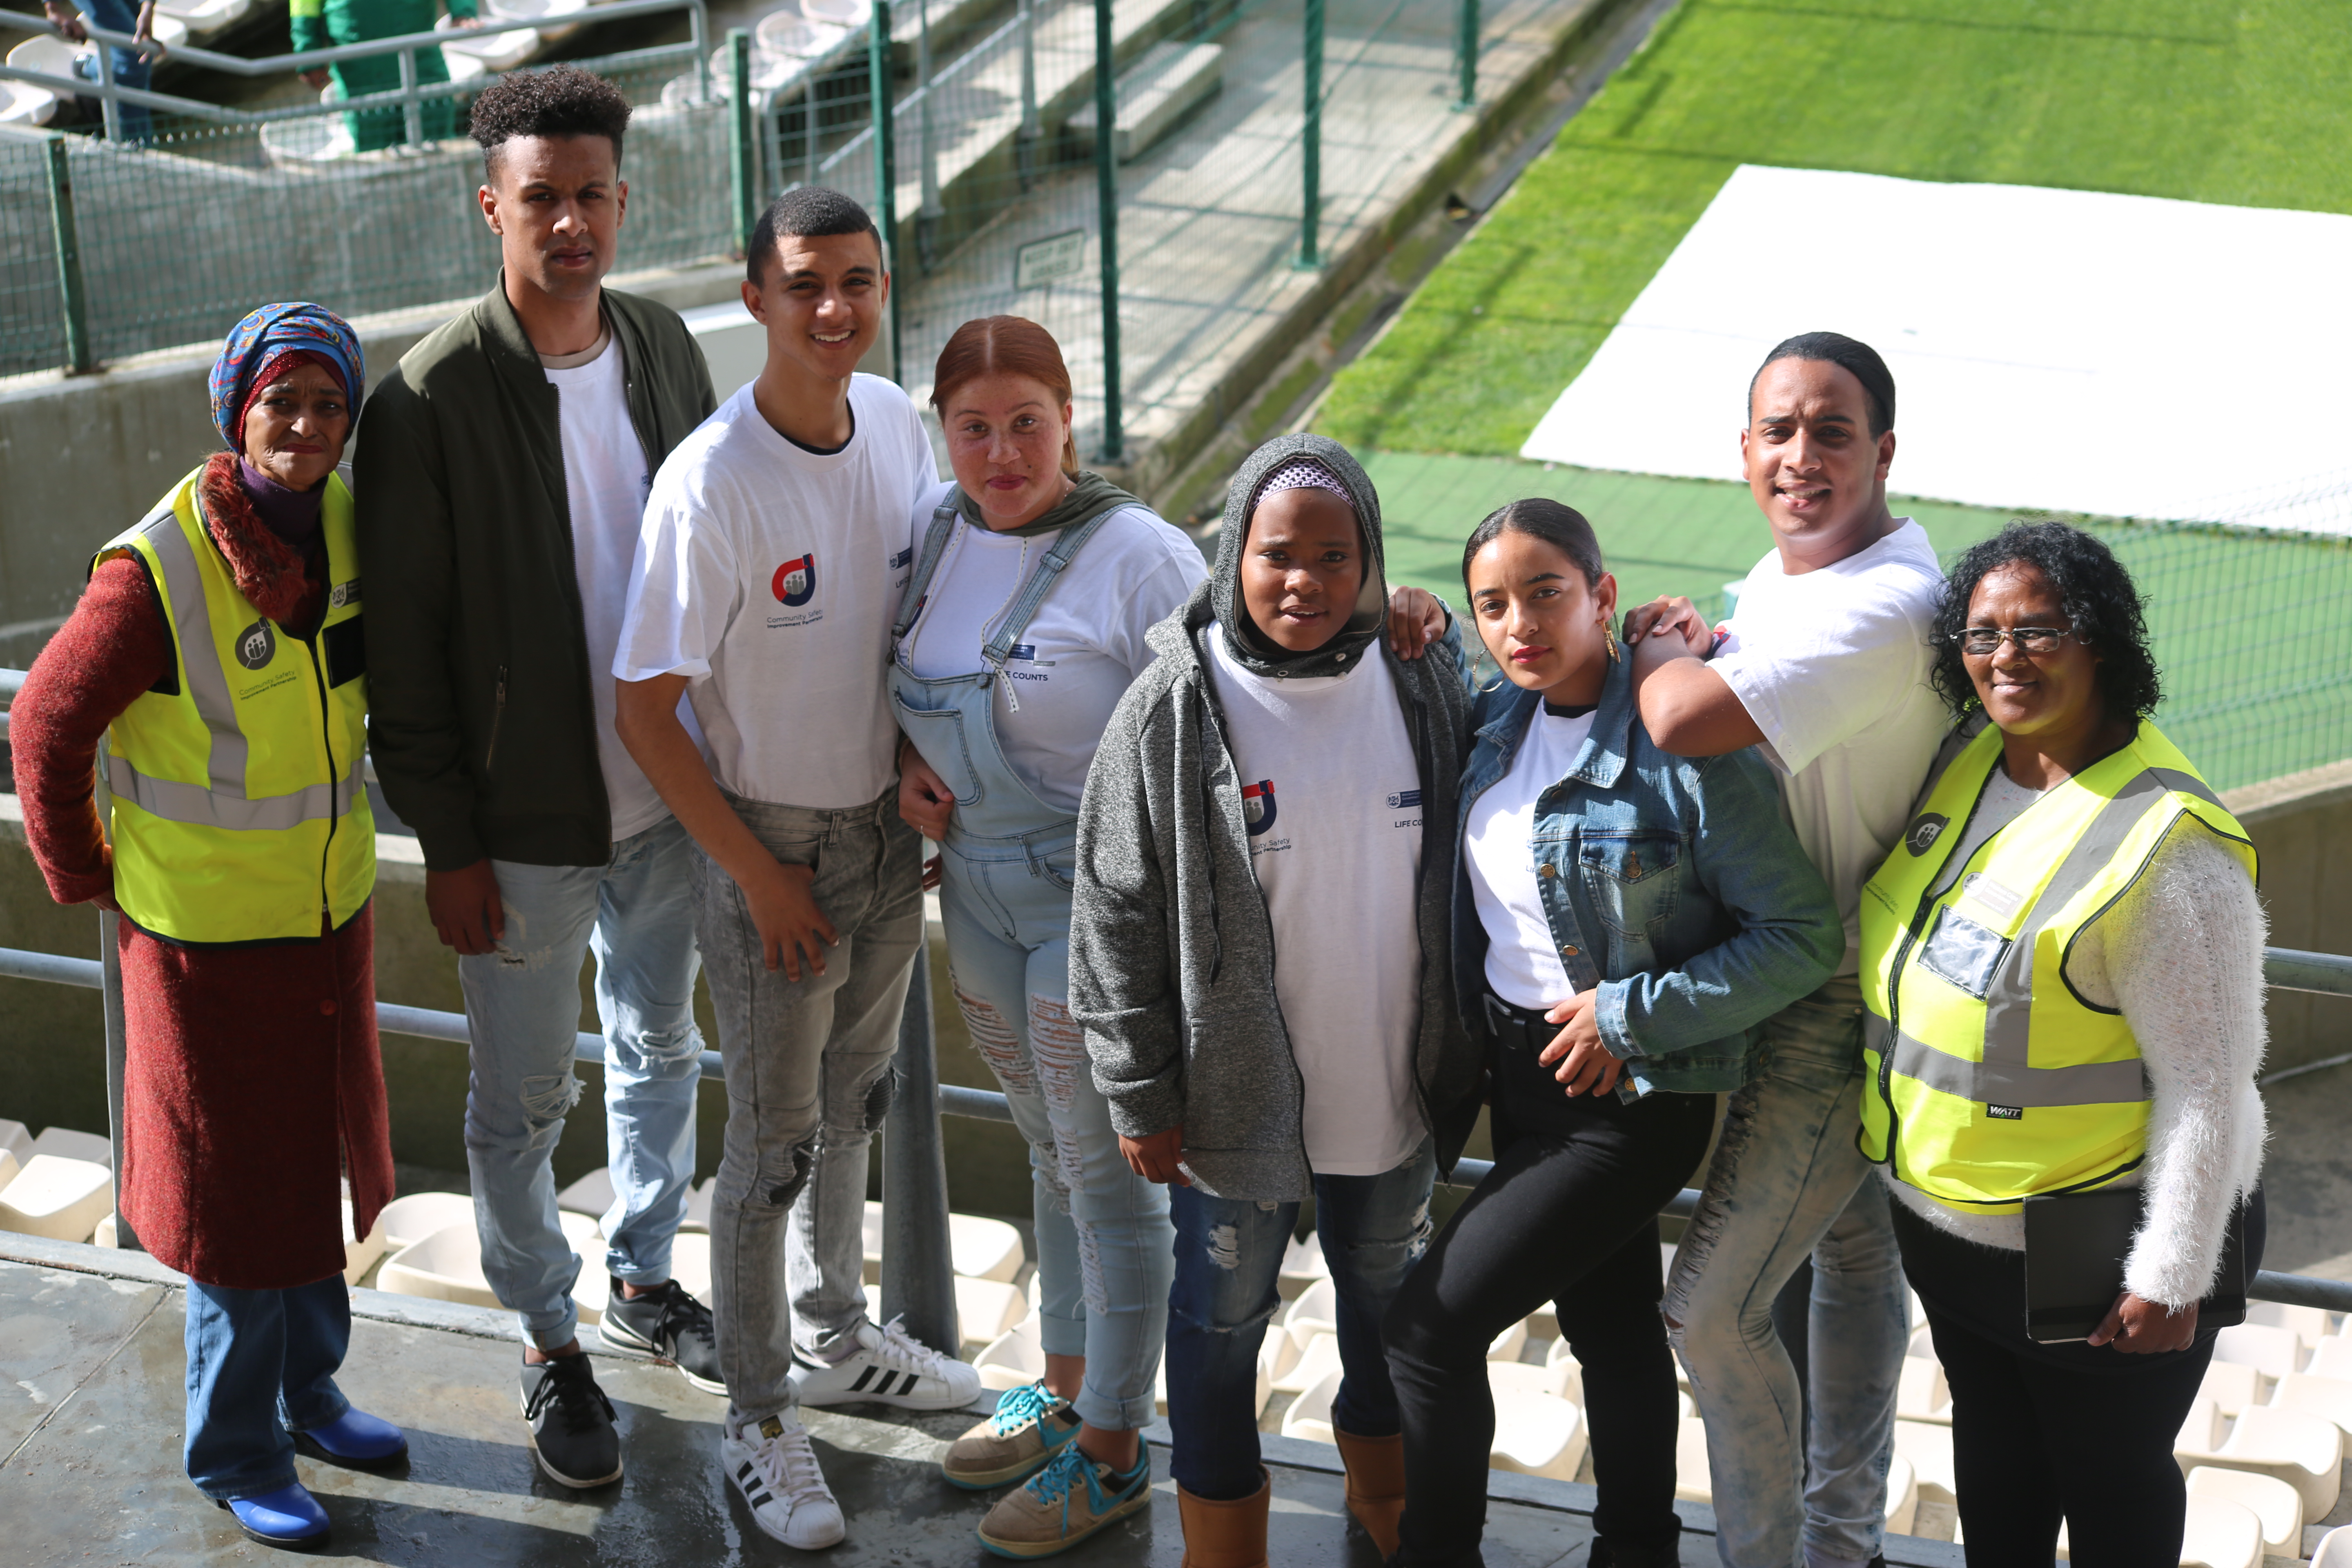 Youth from Saldanha in the West Coast were happy to be part of the Life Counts launch. They are accompanied by Walking Bus members; Ms Maureen Thyss (left) and Ms Geraldine Kokdom (far right).